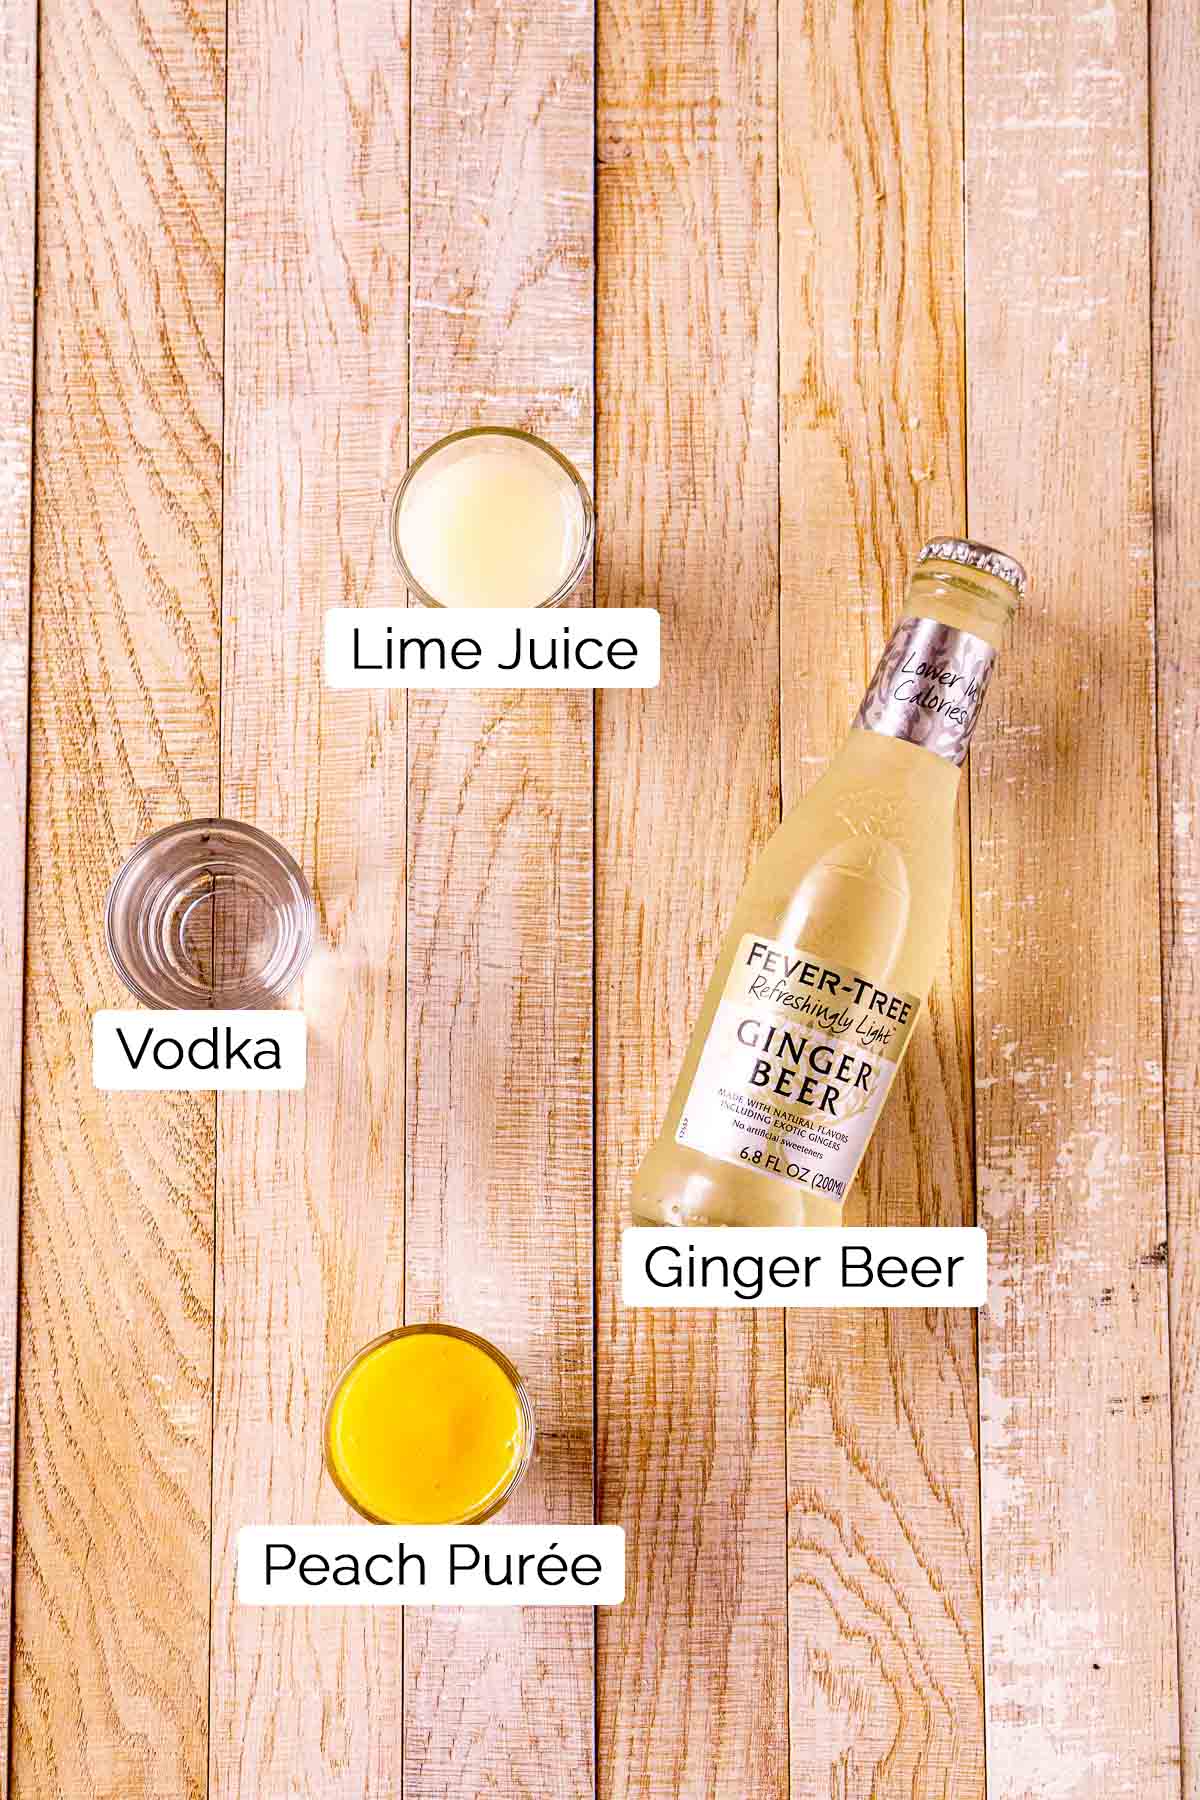 The cocktail ingredients on a cream-colored wooden board with black and white labels.